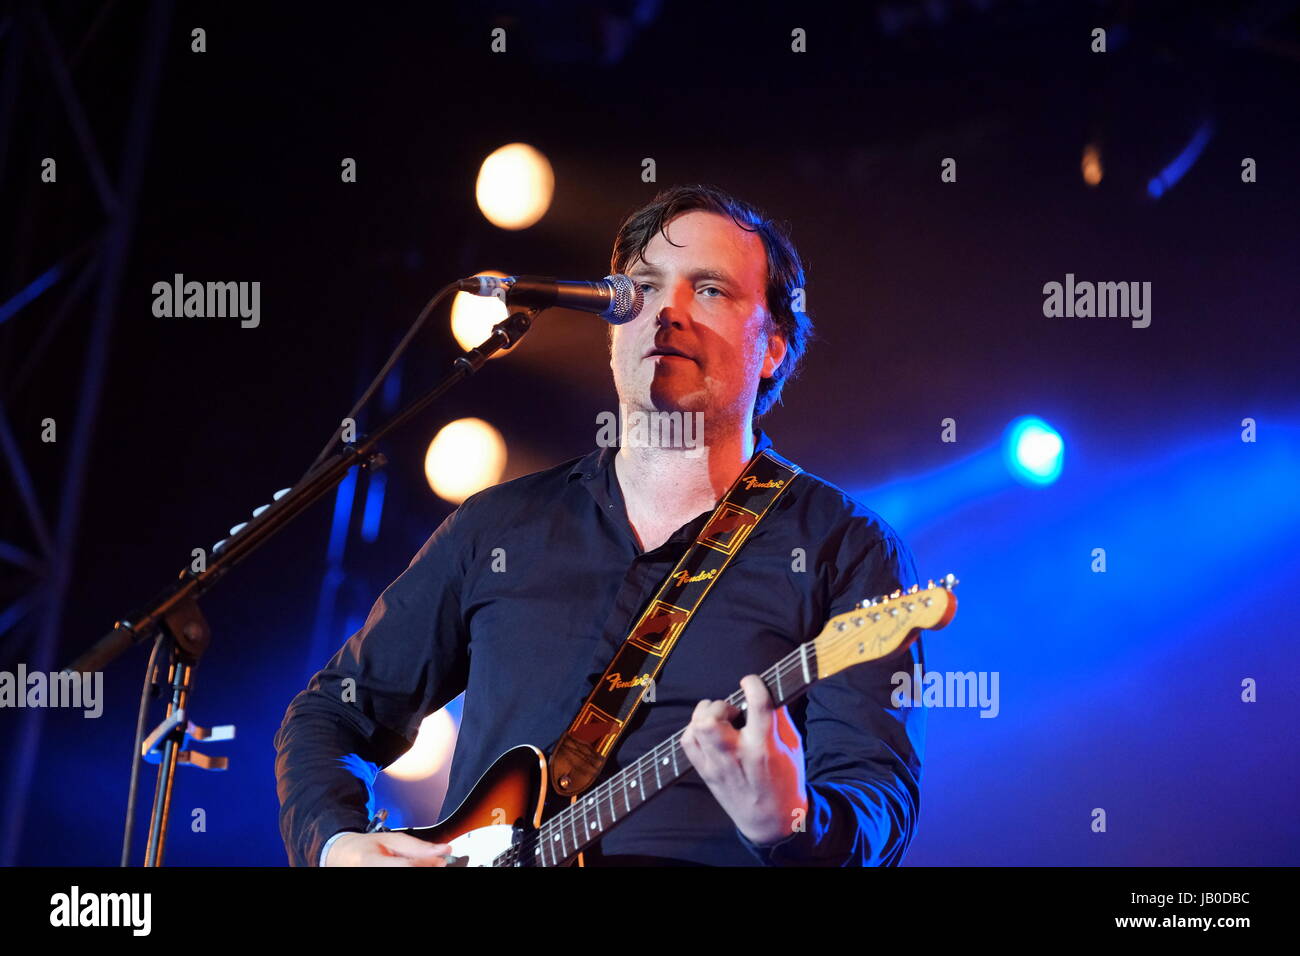 Newport, Isle of Wight, UK. 8th June, 2017. Isle of Wight Festival Day 1 - Starsailor performing at IOW Festival, Seaclose Park Newport 8th June 2017, UK Credit: DFP Photographic/Alamy Live News Stock Photo